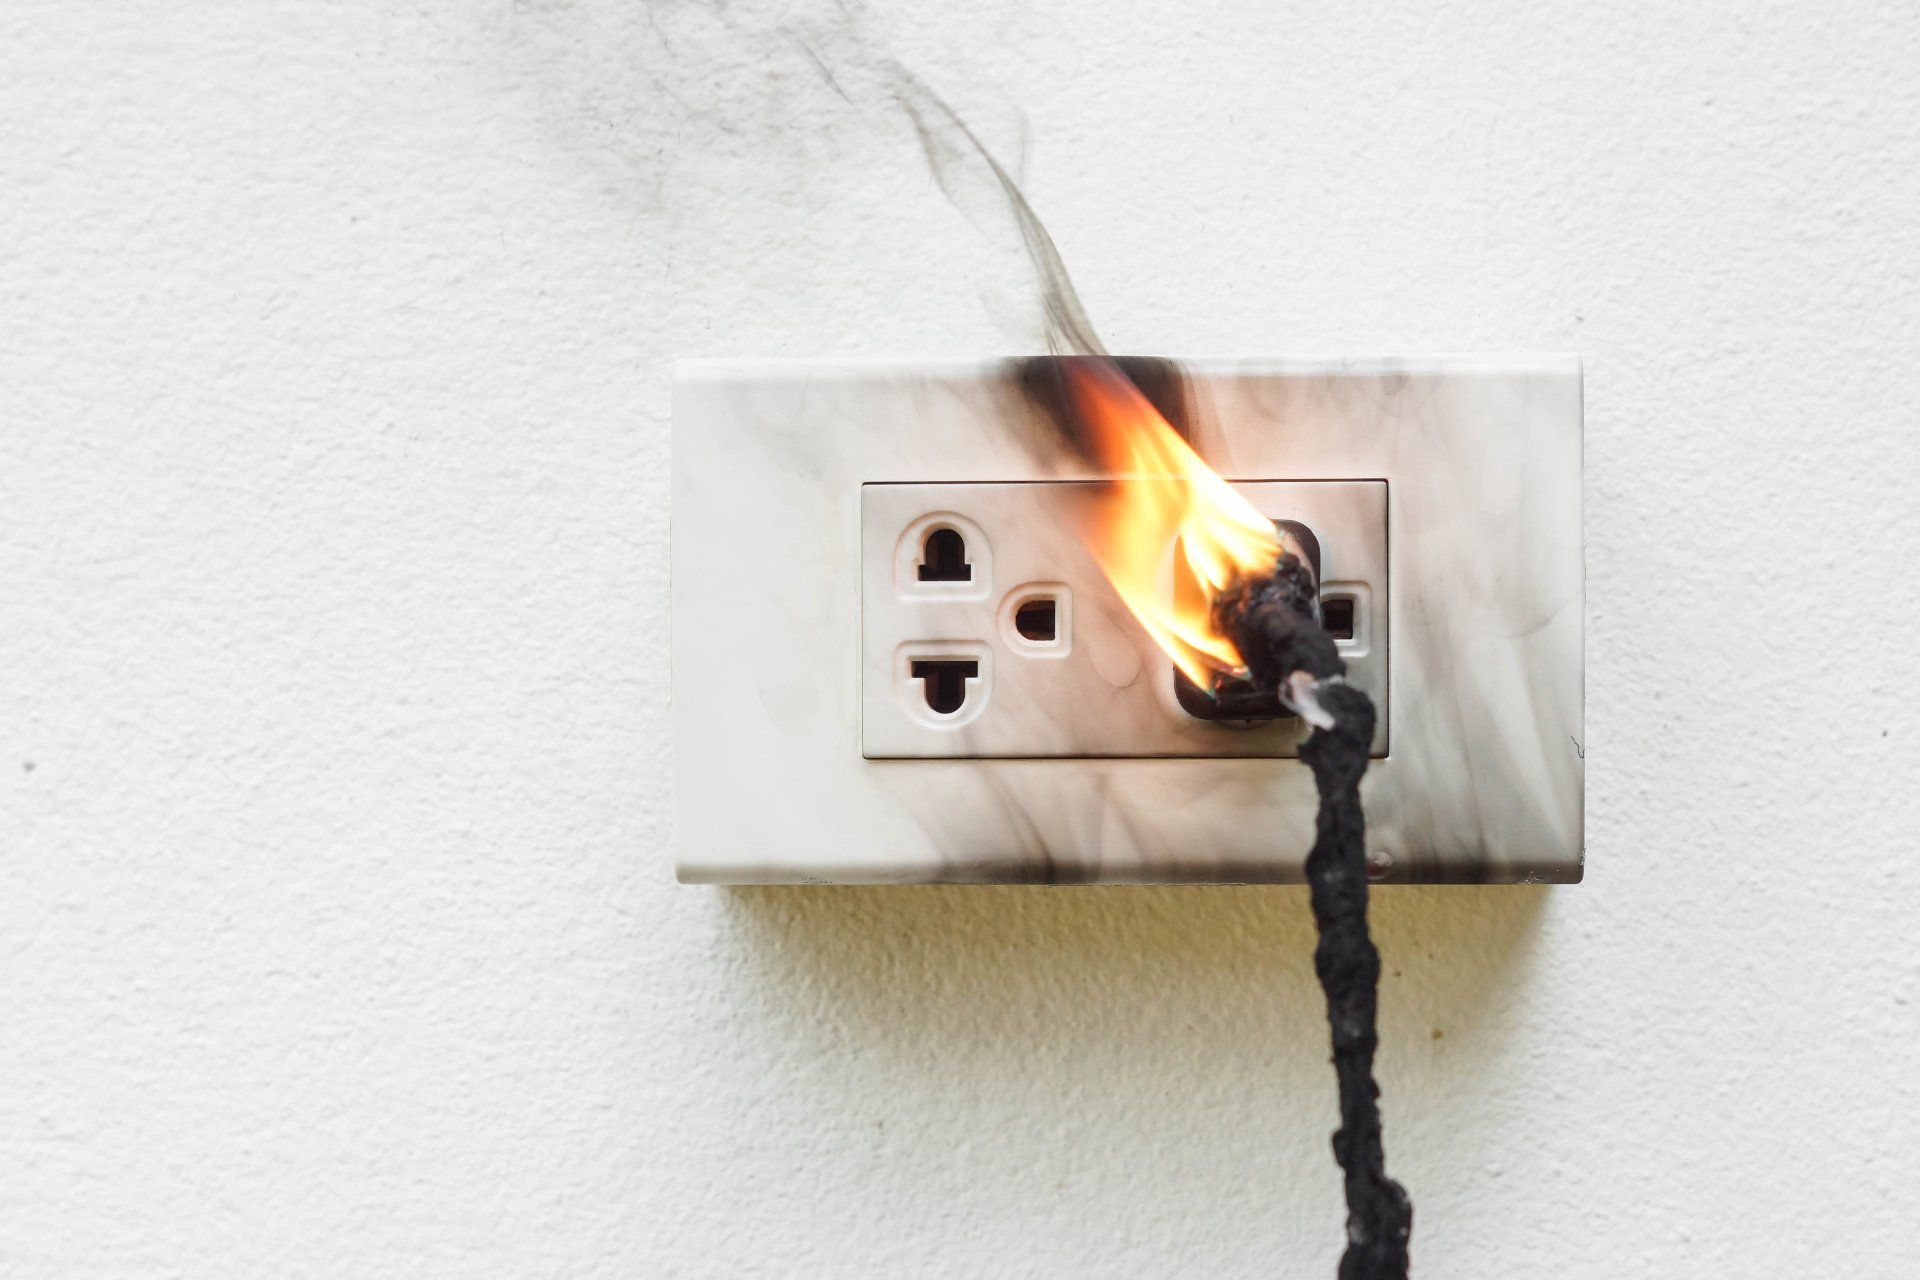 Power outlet on fire